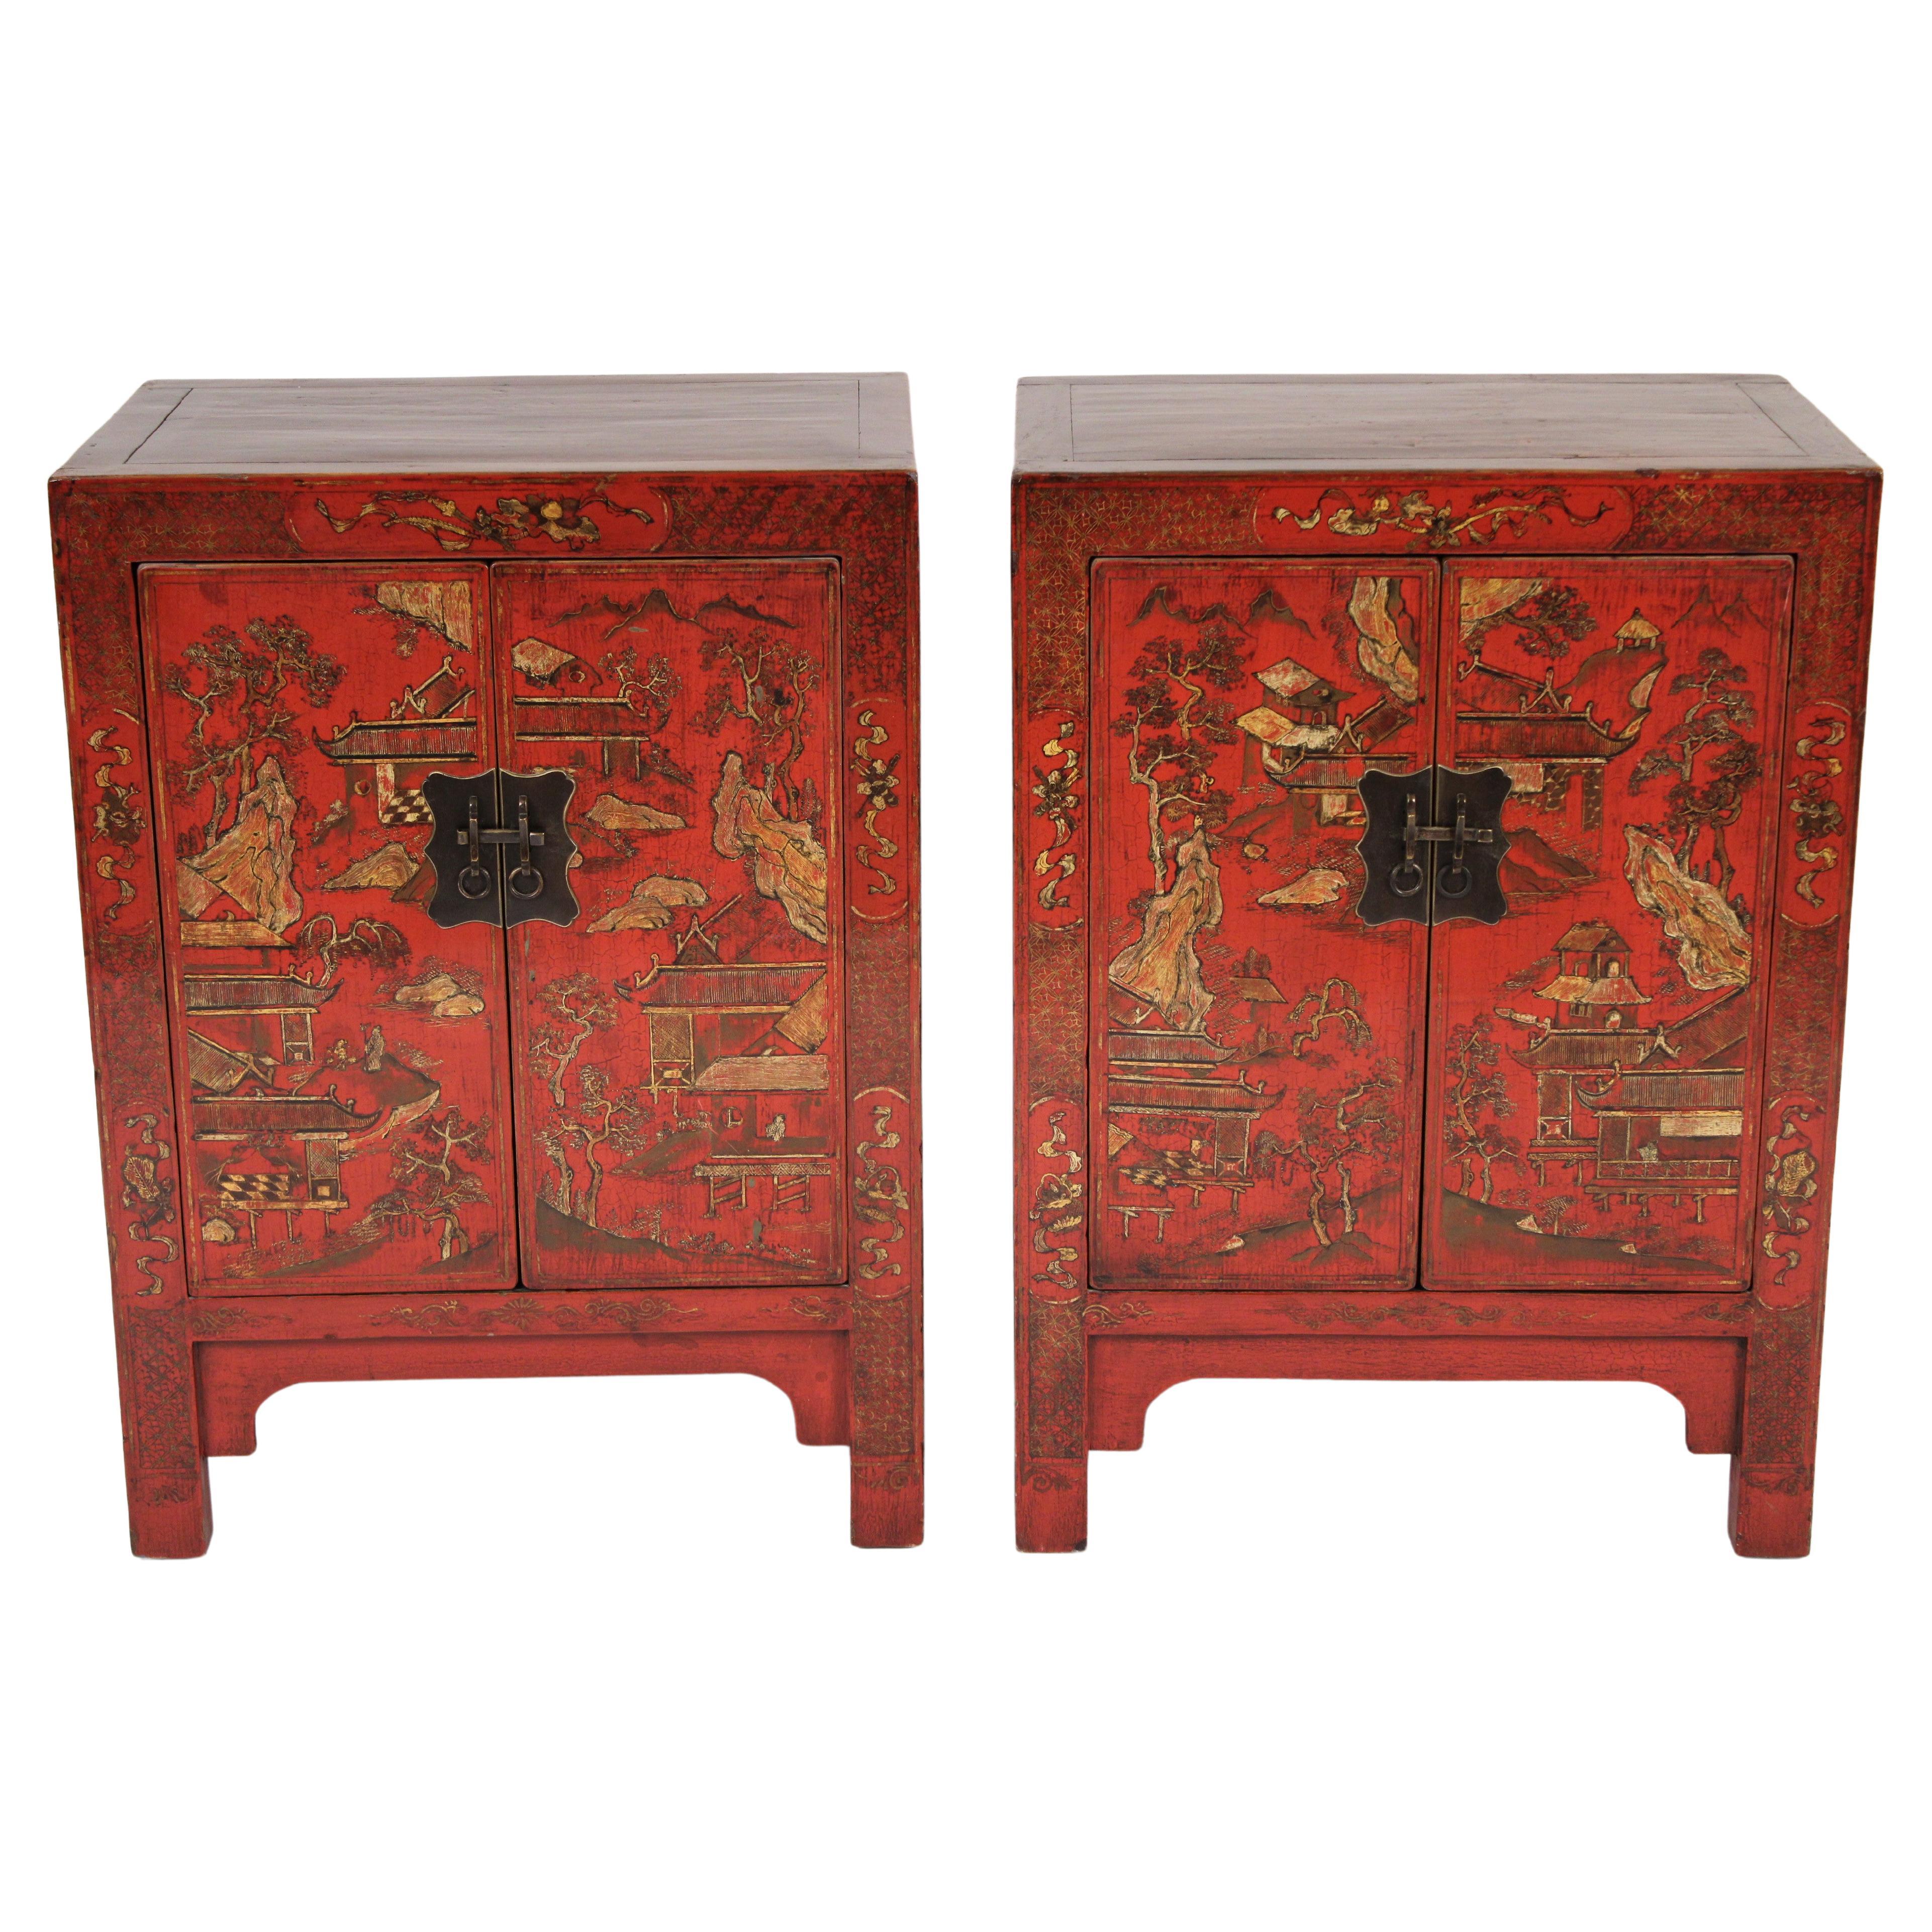 Pair of Chinese Red Lacquer and Gilt Decorated Occasional Cabinets